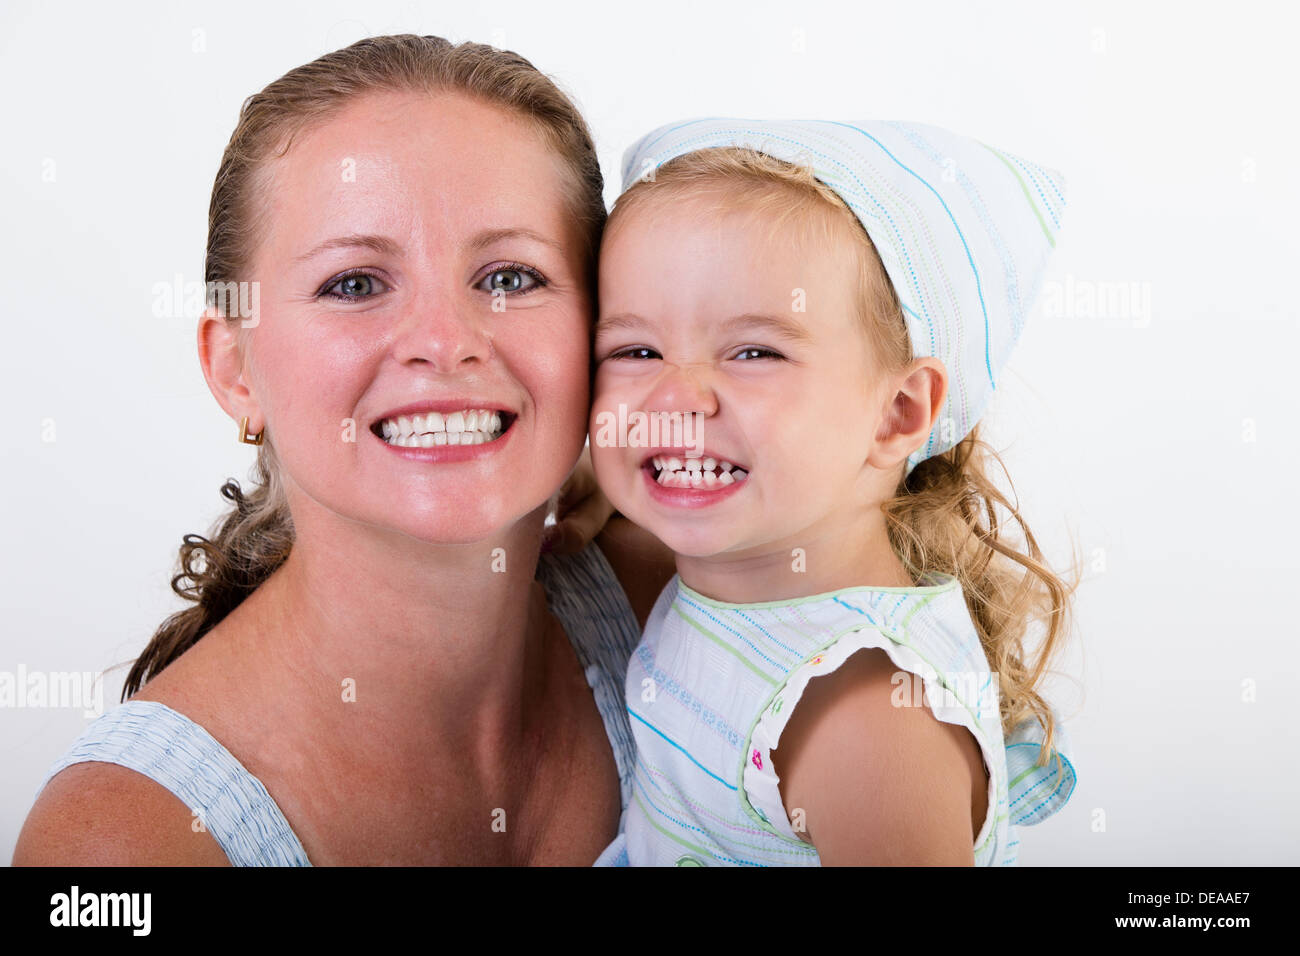 Mother and daughter giving a large toothy smile over white background Stock Photo